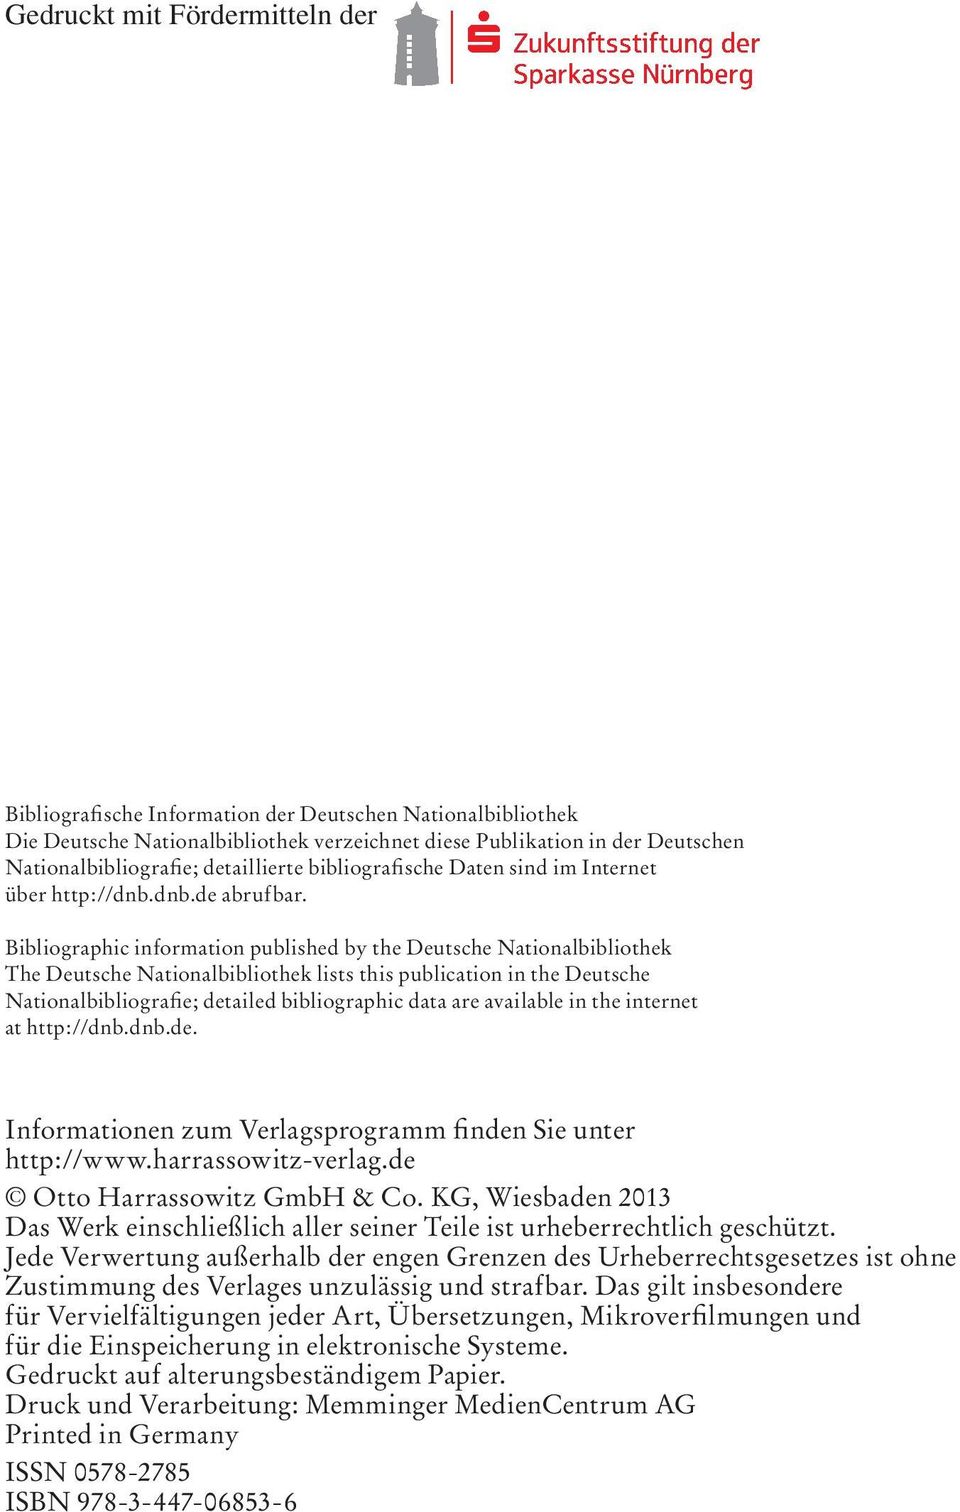 Bibliographic information published by the Deutsche Nationalbibliothek The Deutsche Nationalbibliothek lists this publication in the Deutsche Nationalbibliografie; detailed bibliographic data are